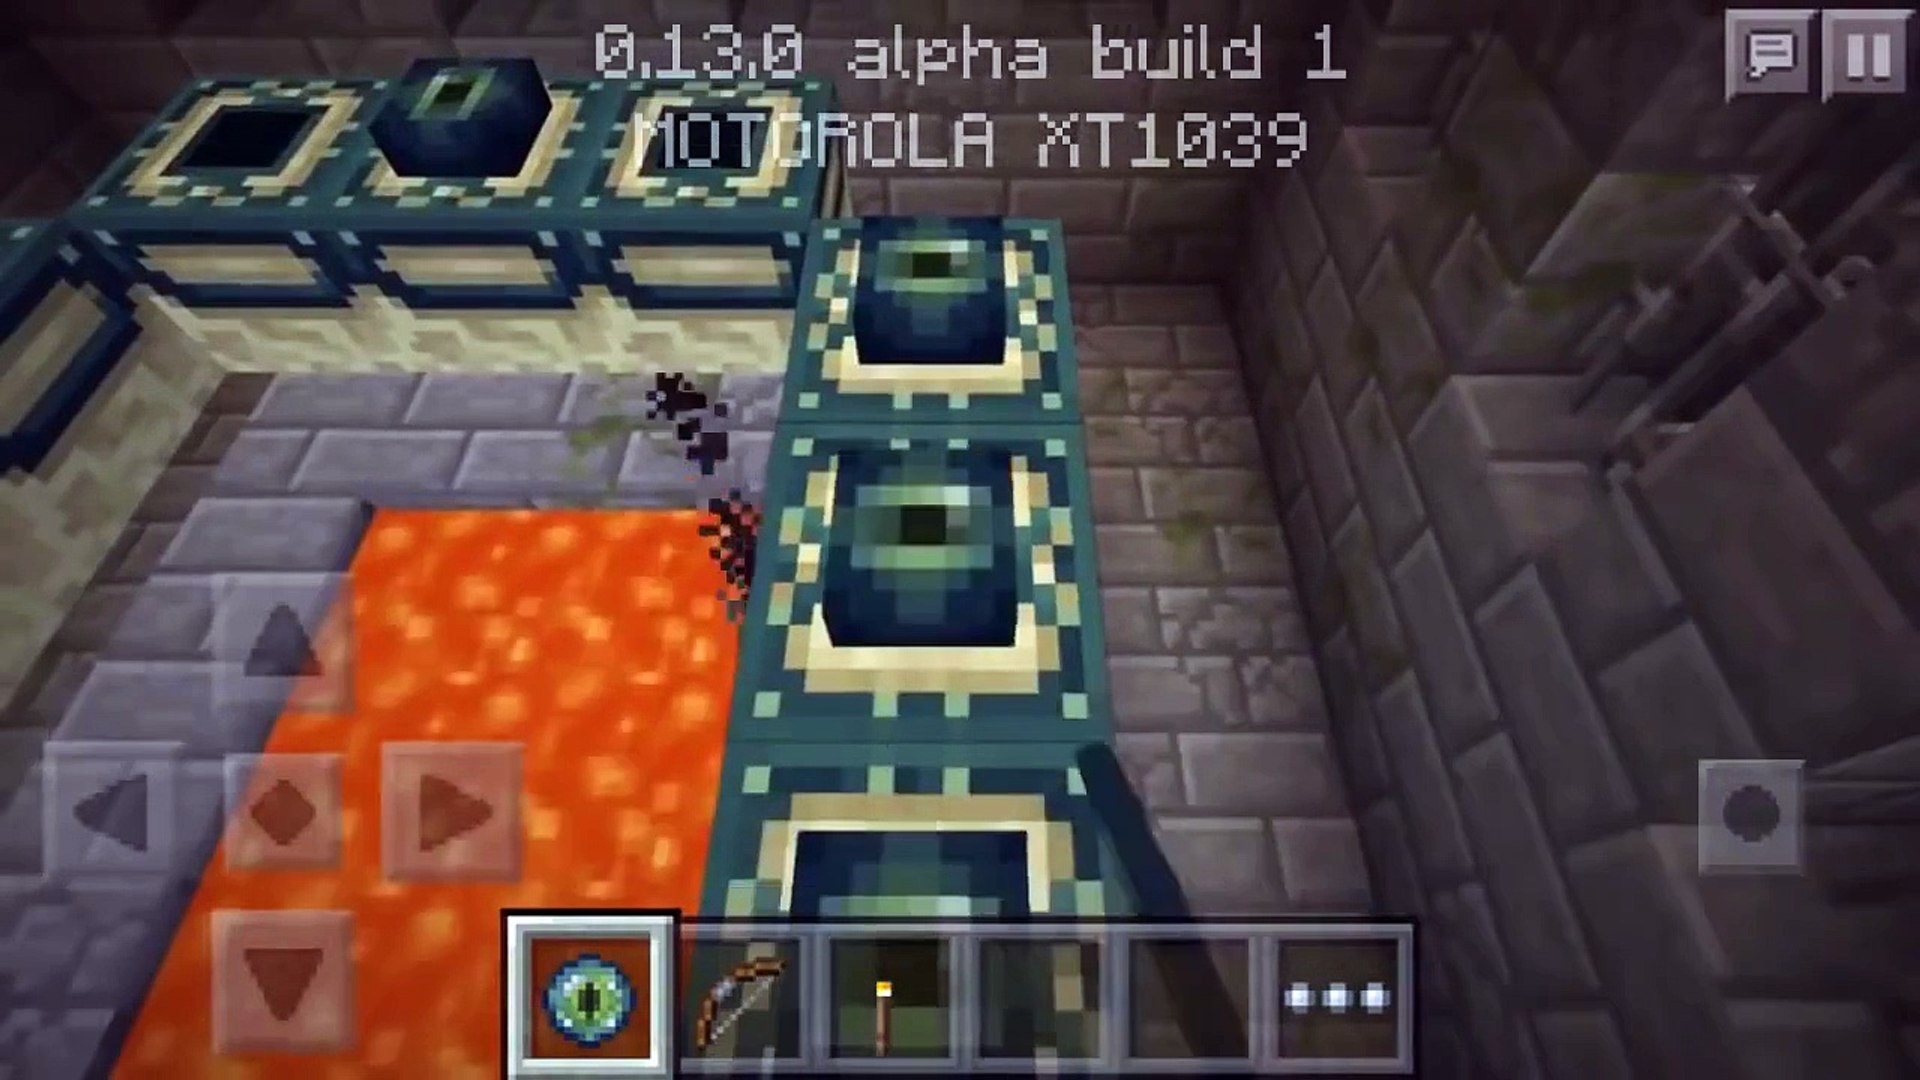 Minecraft Pe Pocket Edition 0 14 0 Alpha Build 1 Update Apk Free Download Link Concept Dailymotion Video